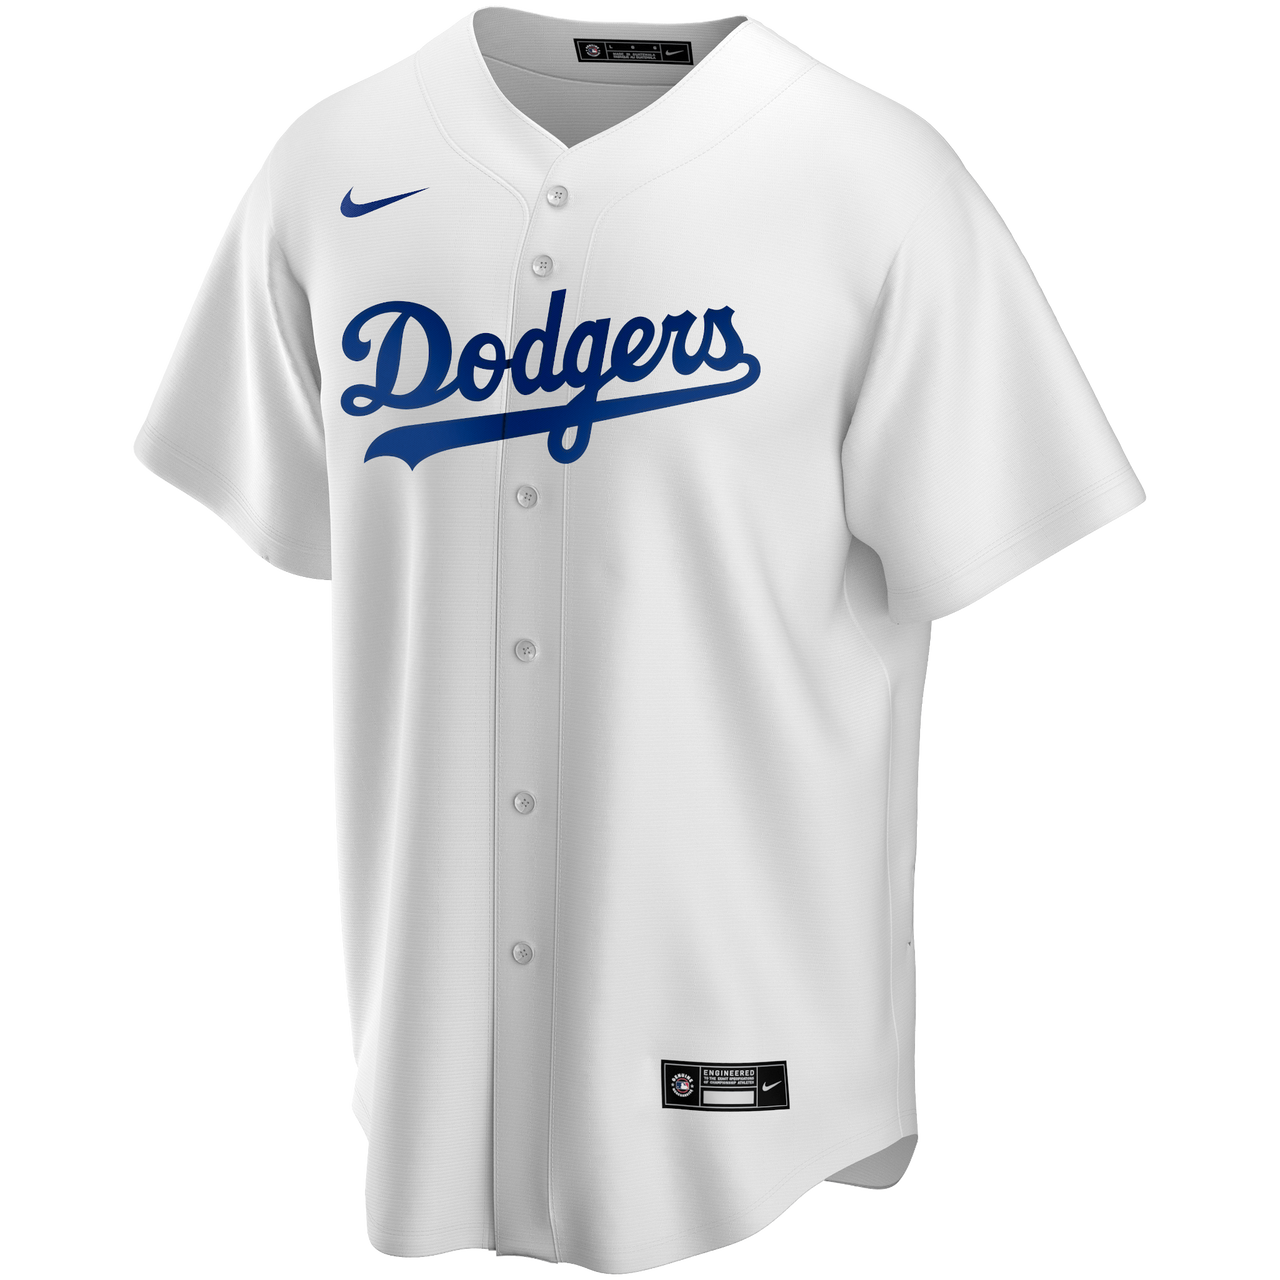 Los Angeles Dodgers Corey Seager Nike Jersey Medium Youth Size